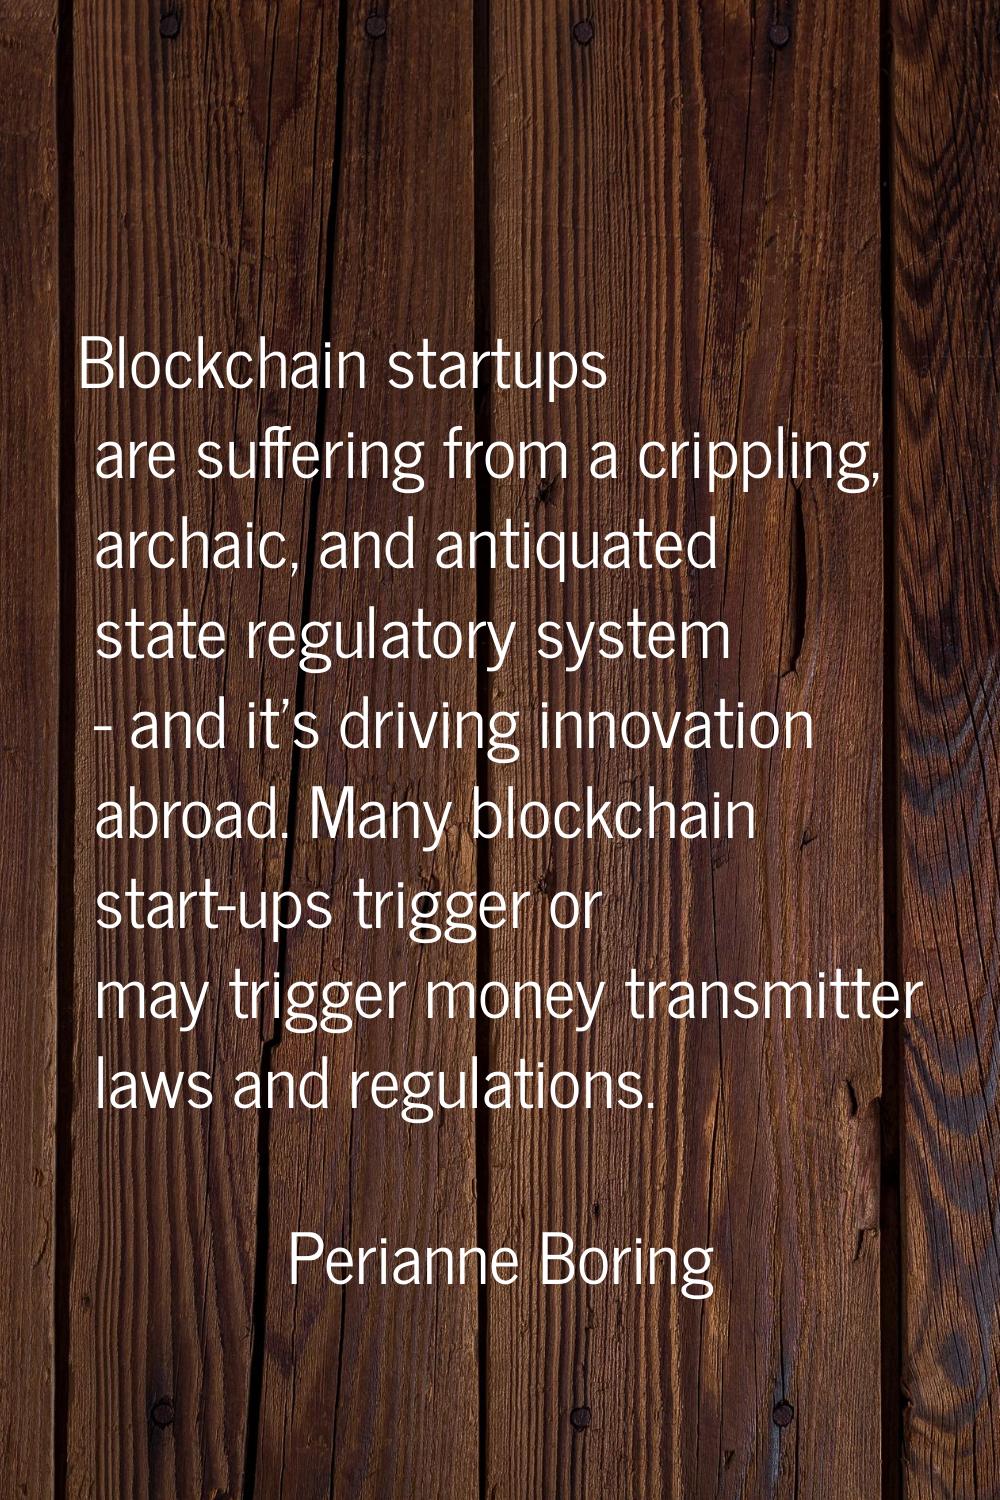 Blockchain startups are suffering from a crippling, archaic, and antiquated state regulatory system